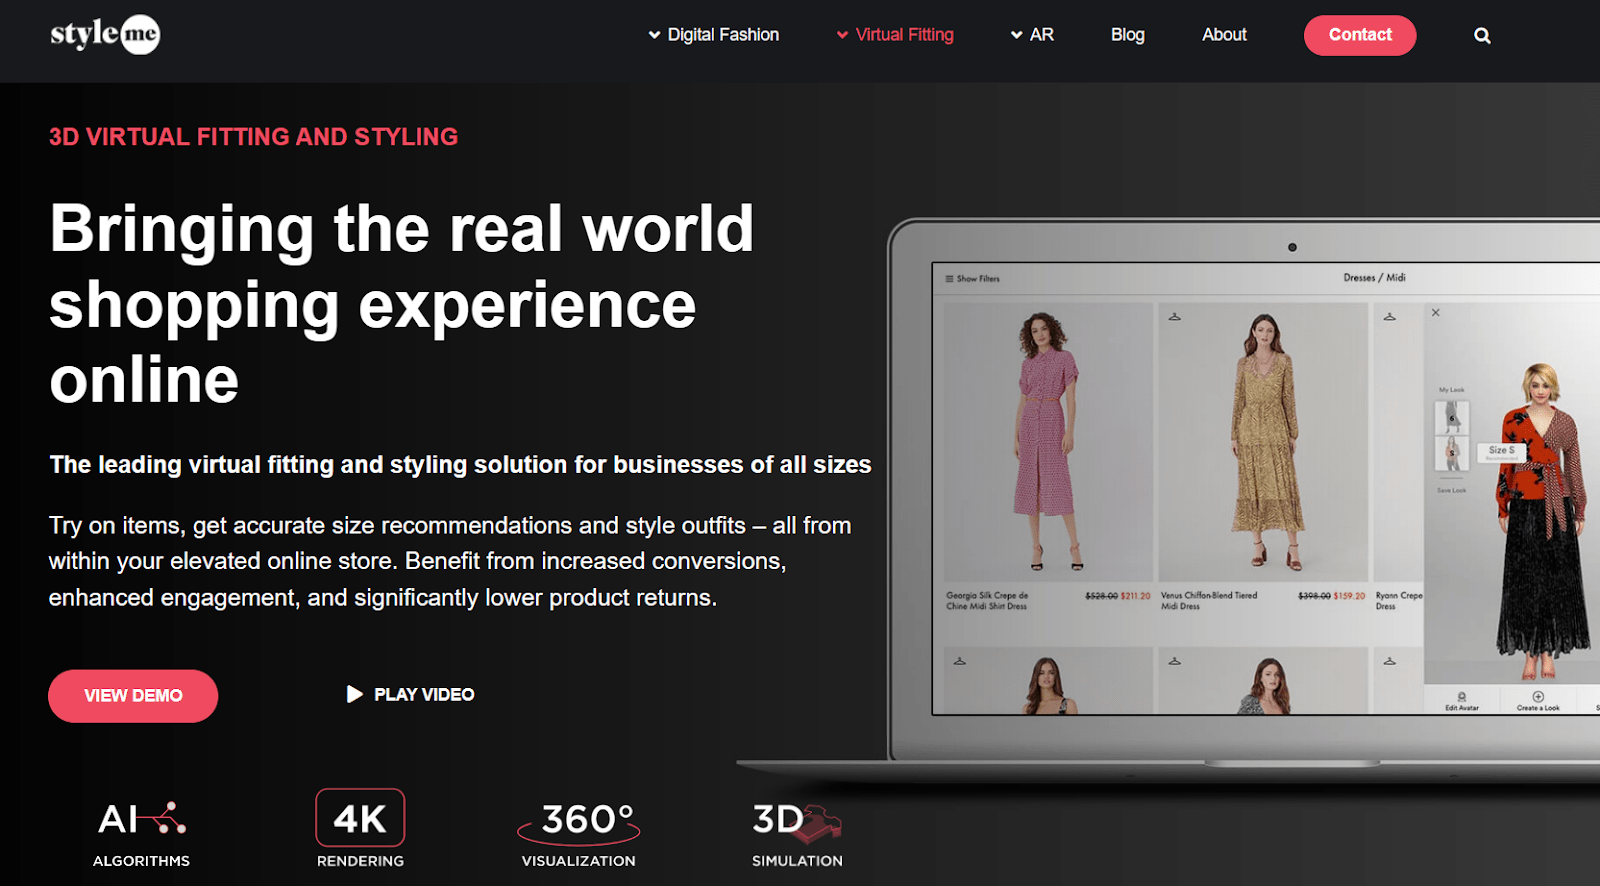 style.me website - bringing the real world shopping experience online